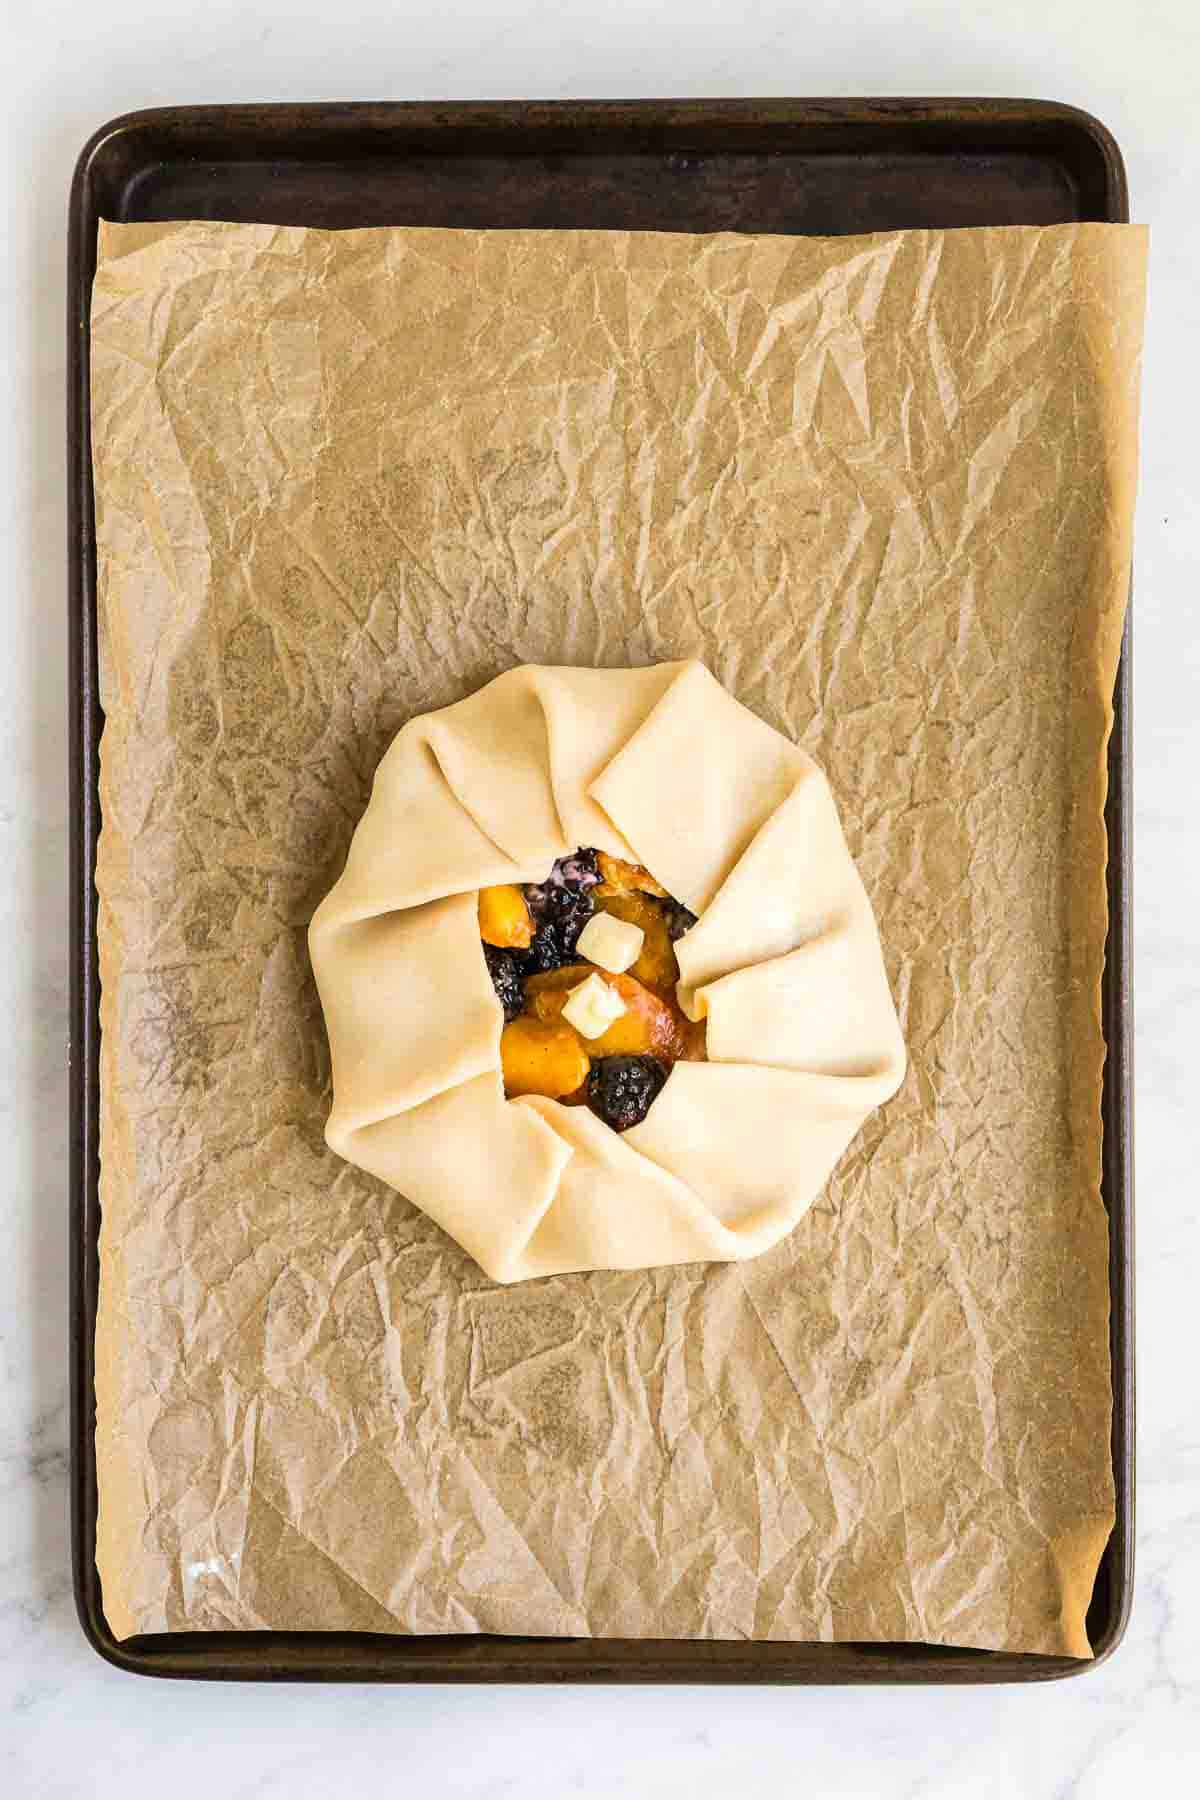 An unbaked rustic tart filled with fruit is placed on a sheet pan lined with brown parchment paper.